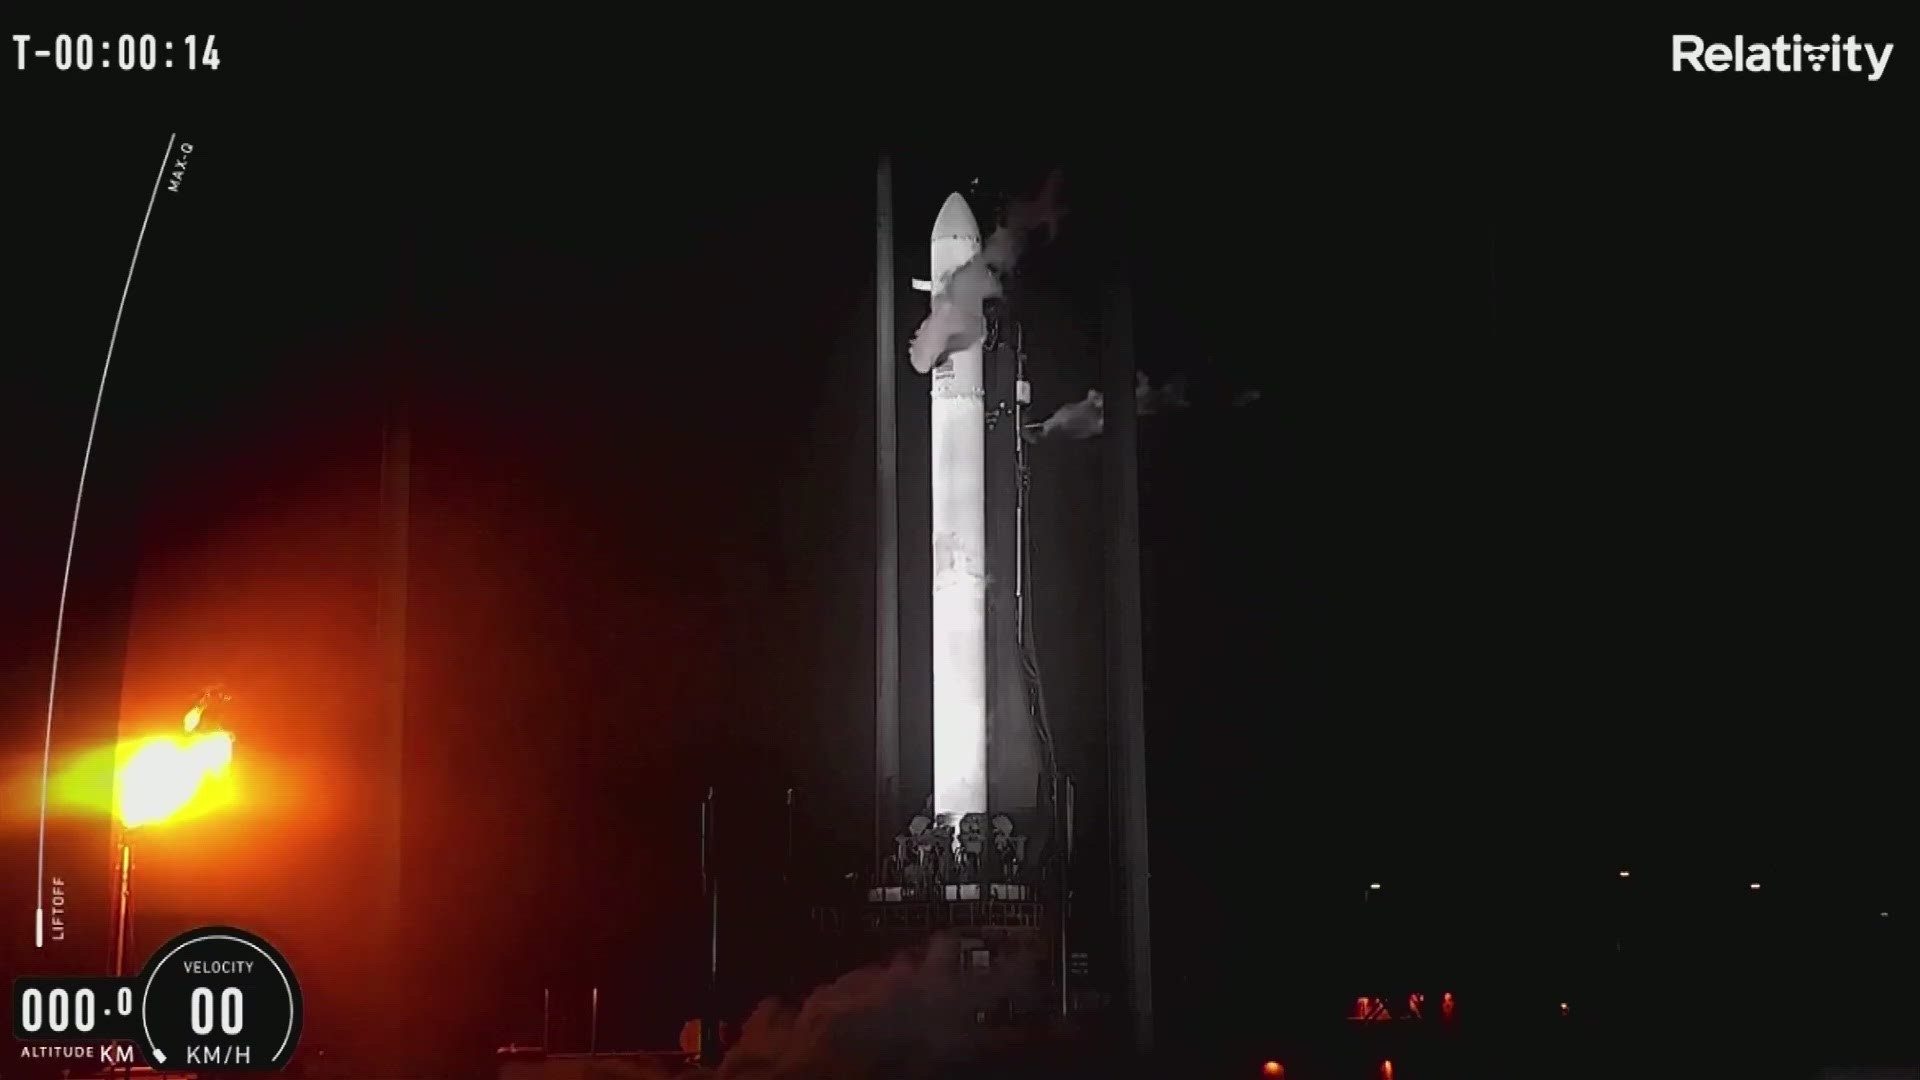 The rocket only made it three minutes into the flight.